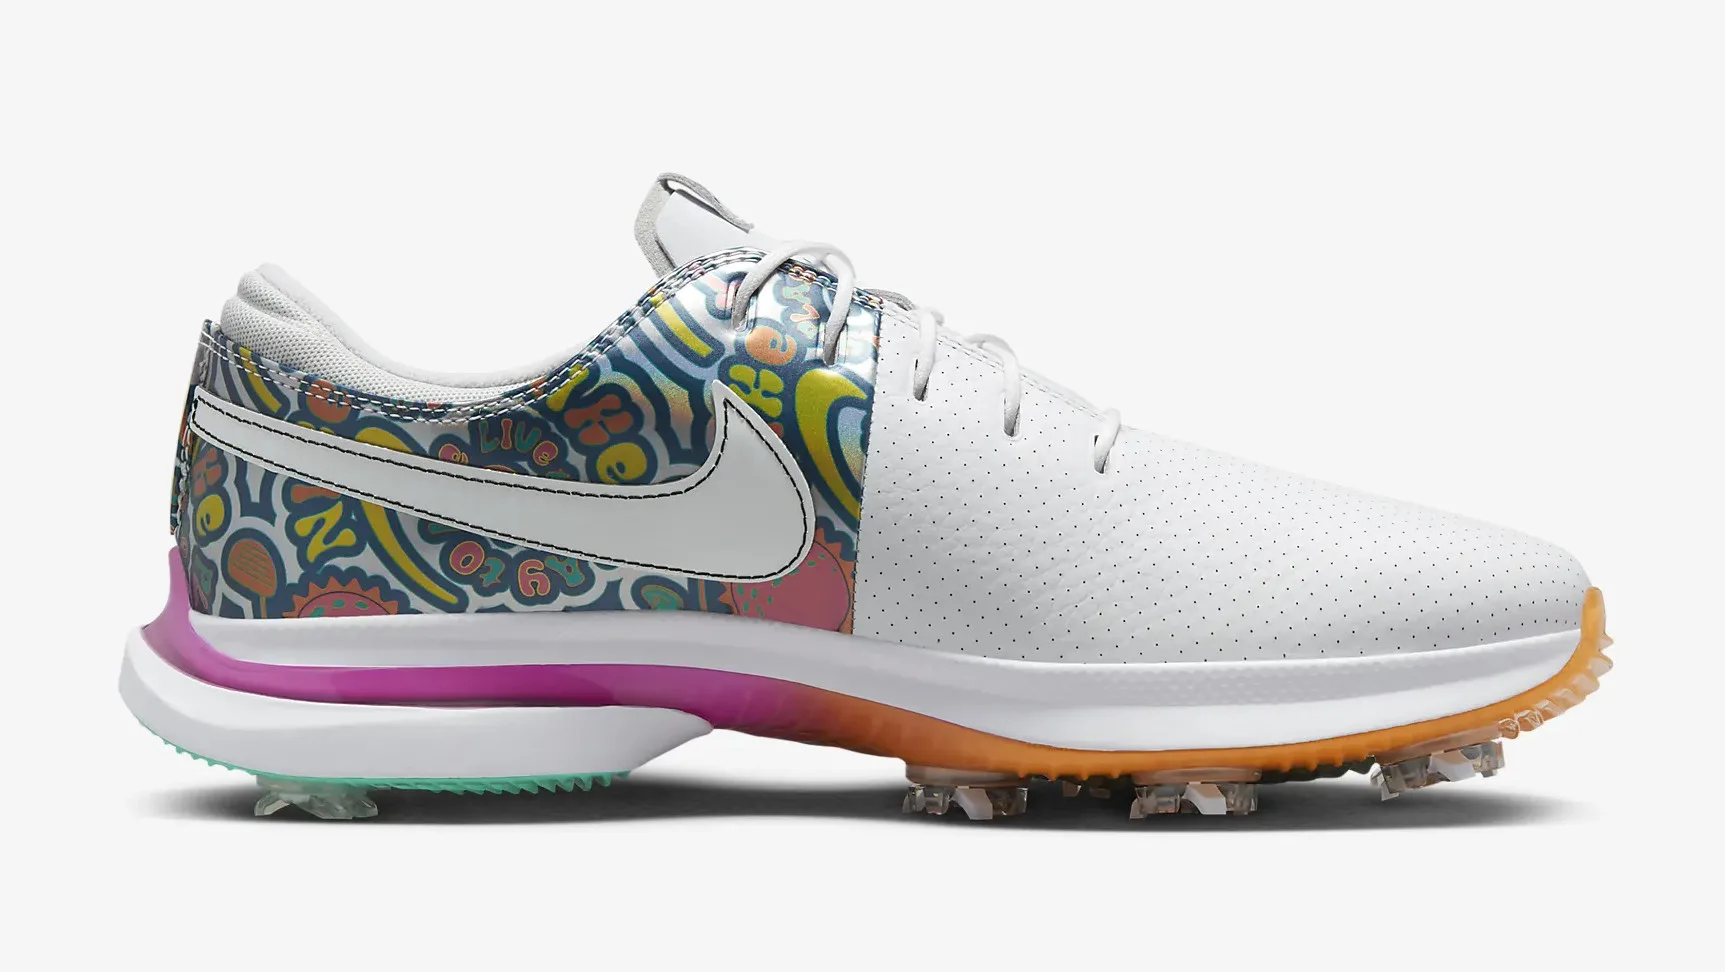 Nike's 2021 British Open golf shoes are inspired by dartboards